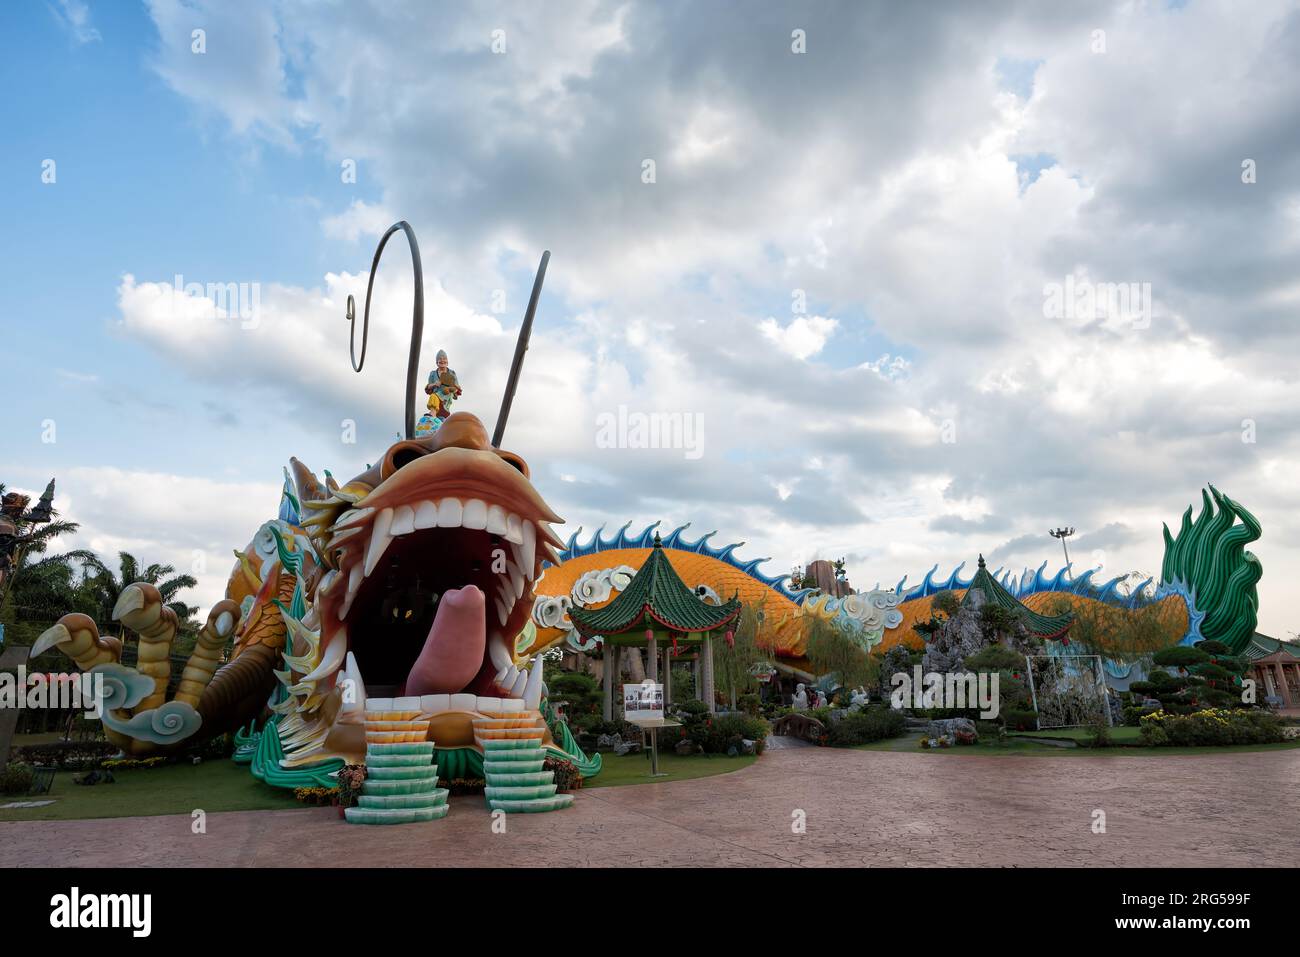 Johor, Malaysia, - Feb 8, 2019: A grand scenic traditional colourful chinese dragon temple in Yong Peng, Johor Malaysia - World`s largest and longest Stock Photo